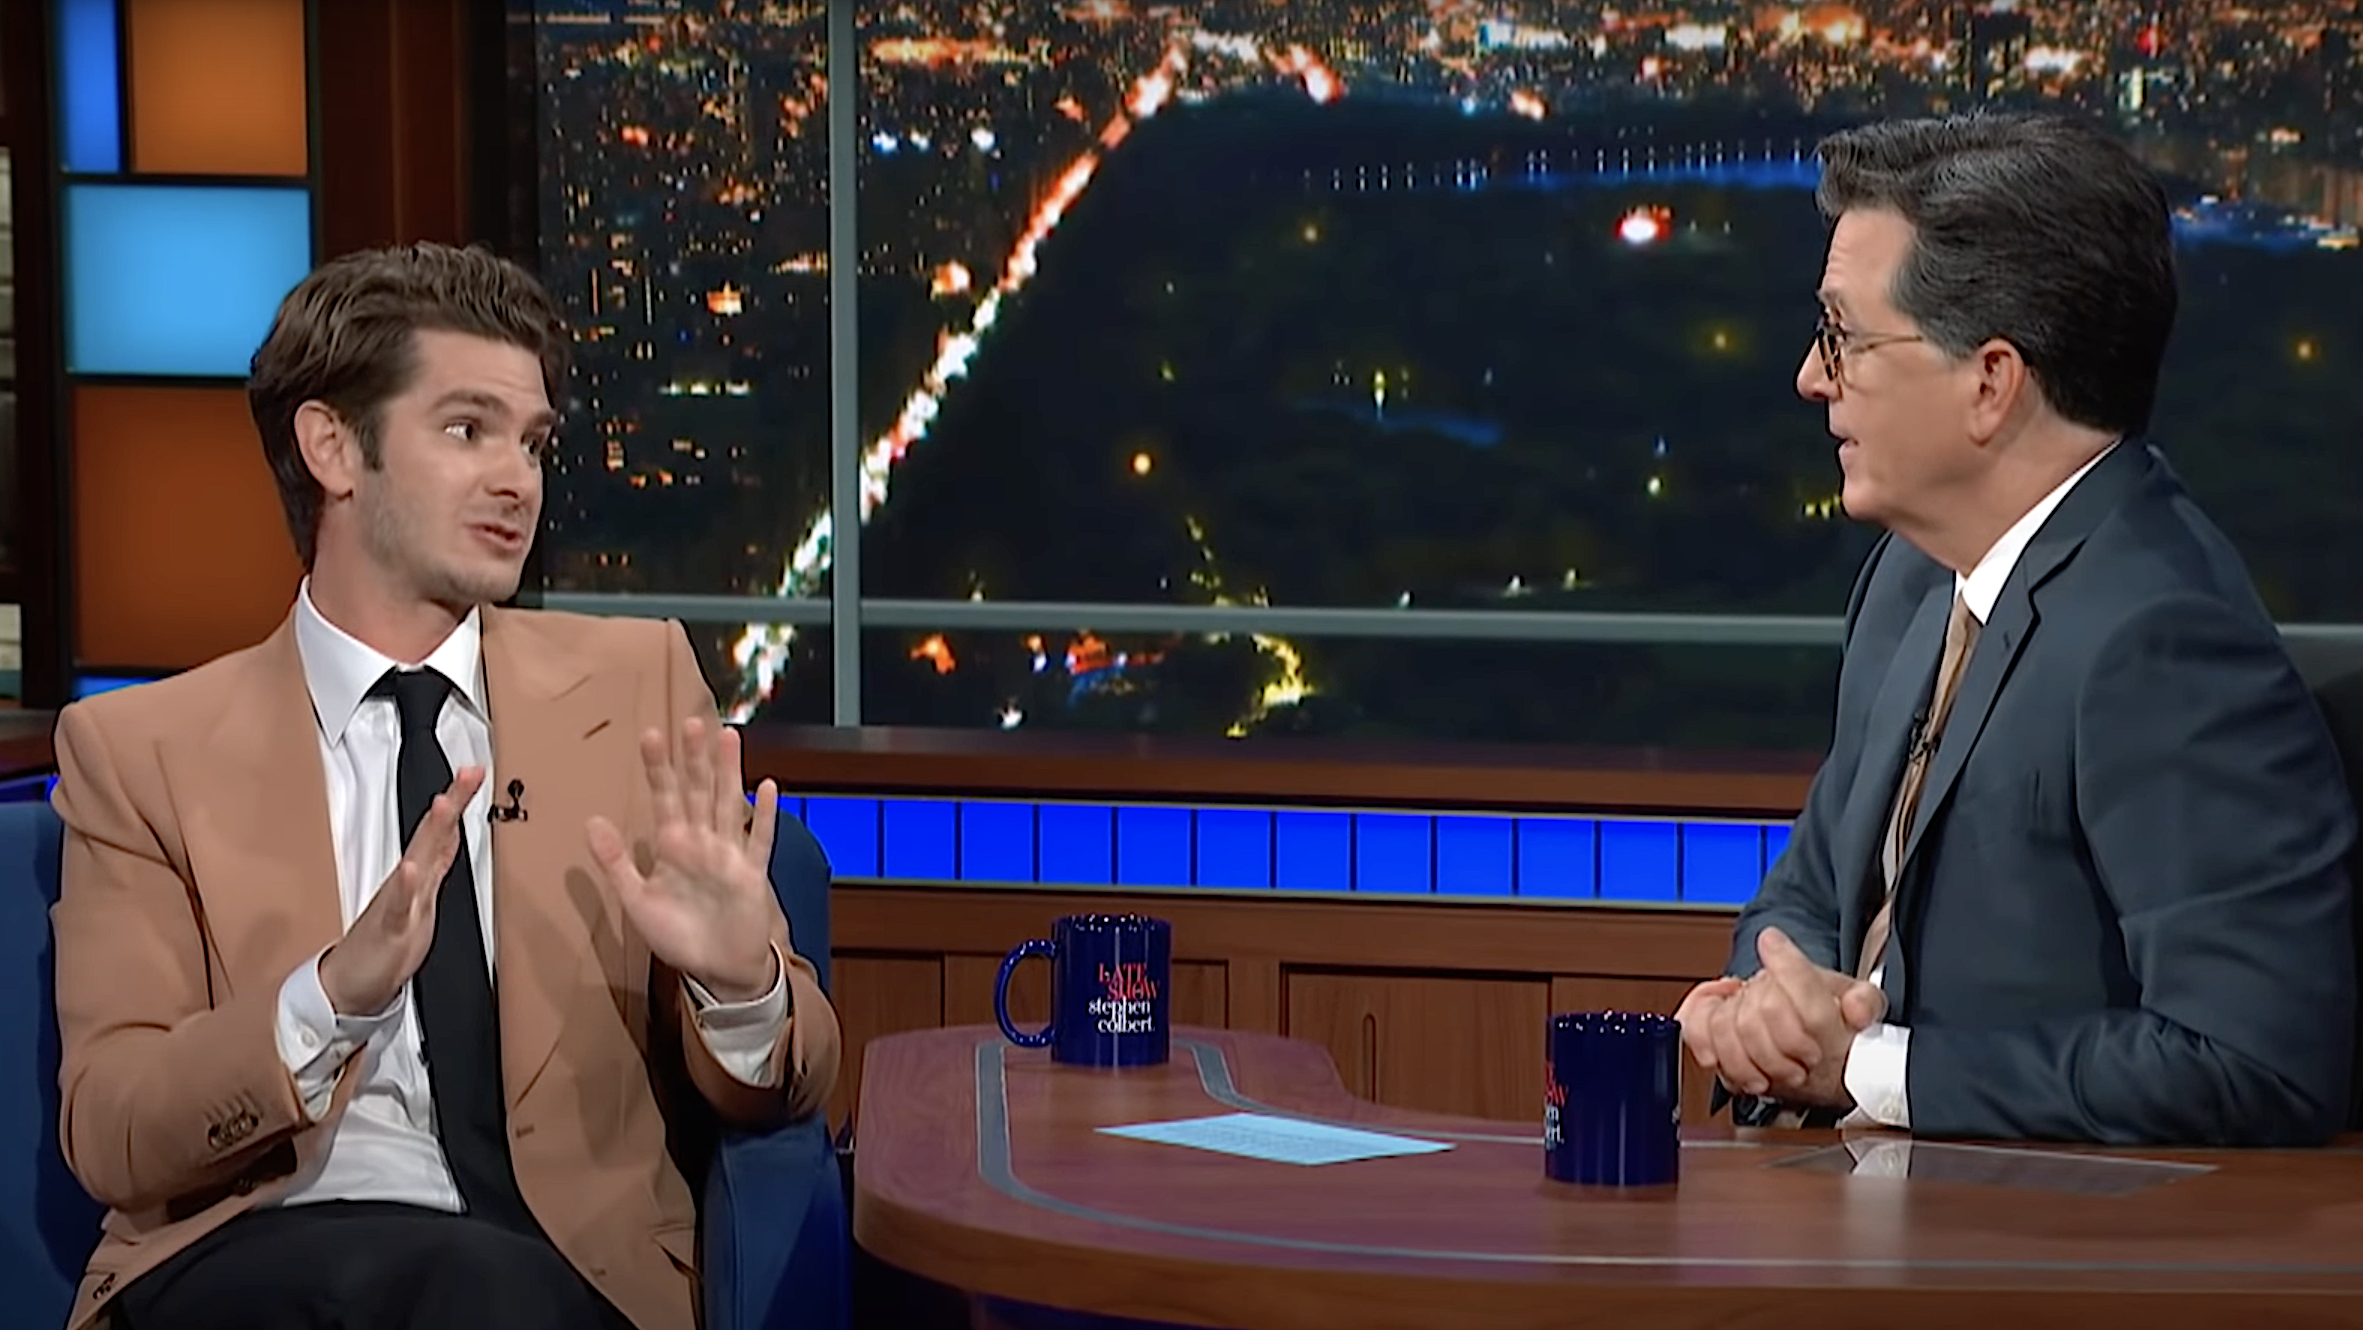 Andrew Garfield gets affectingly real about acting, tells Stephen Colbert he fibbed his way into a musical